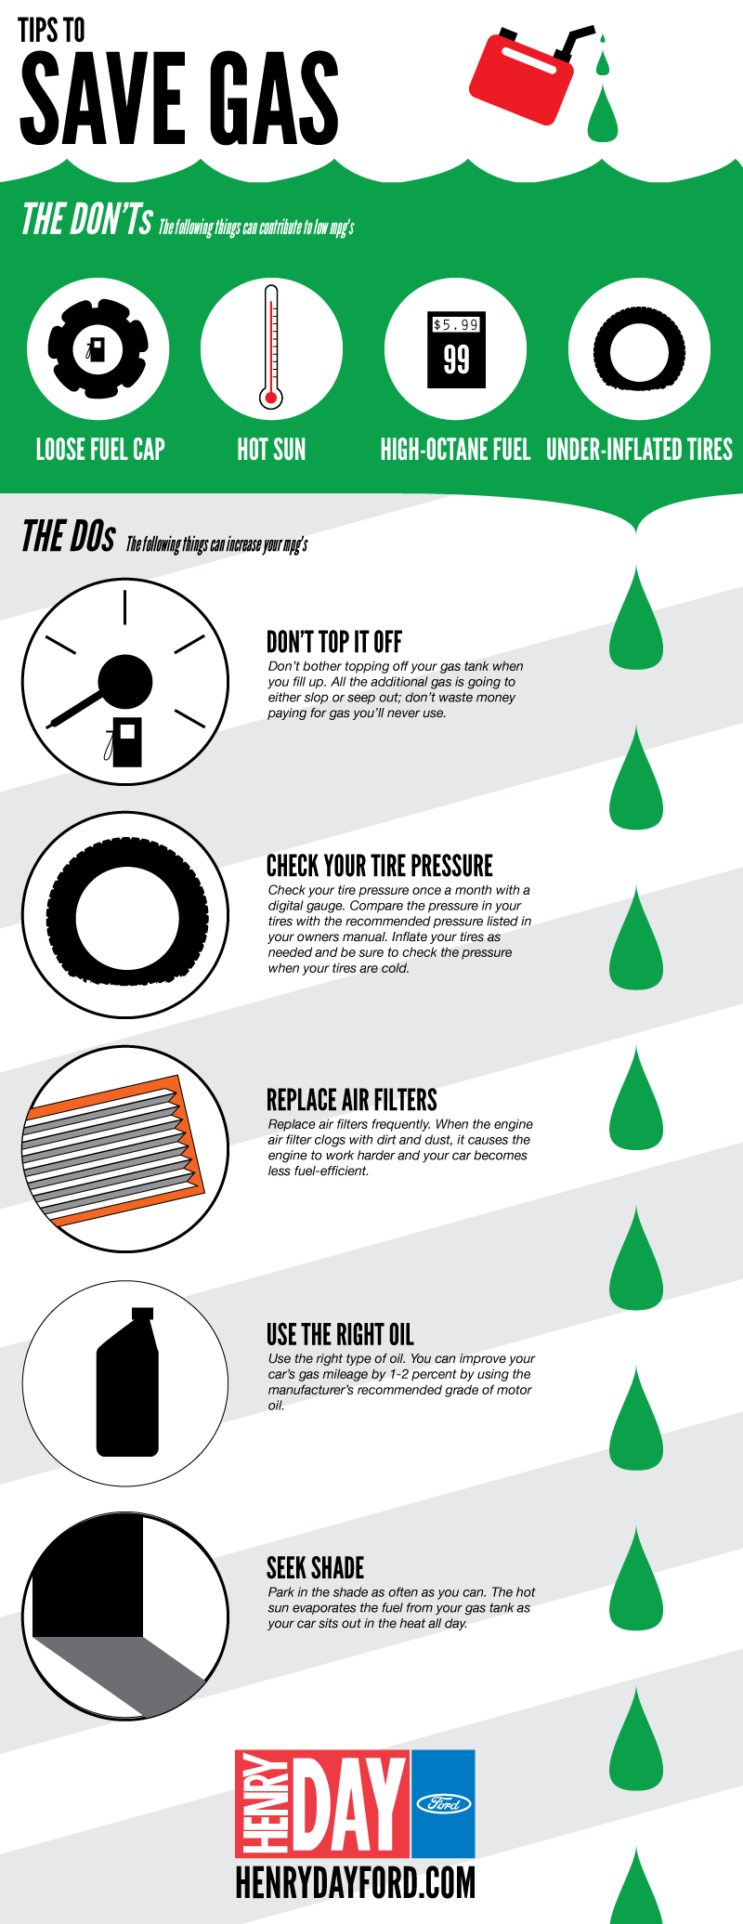 Tips to Save Gas